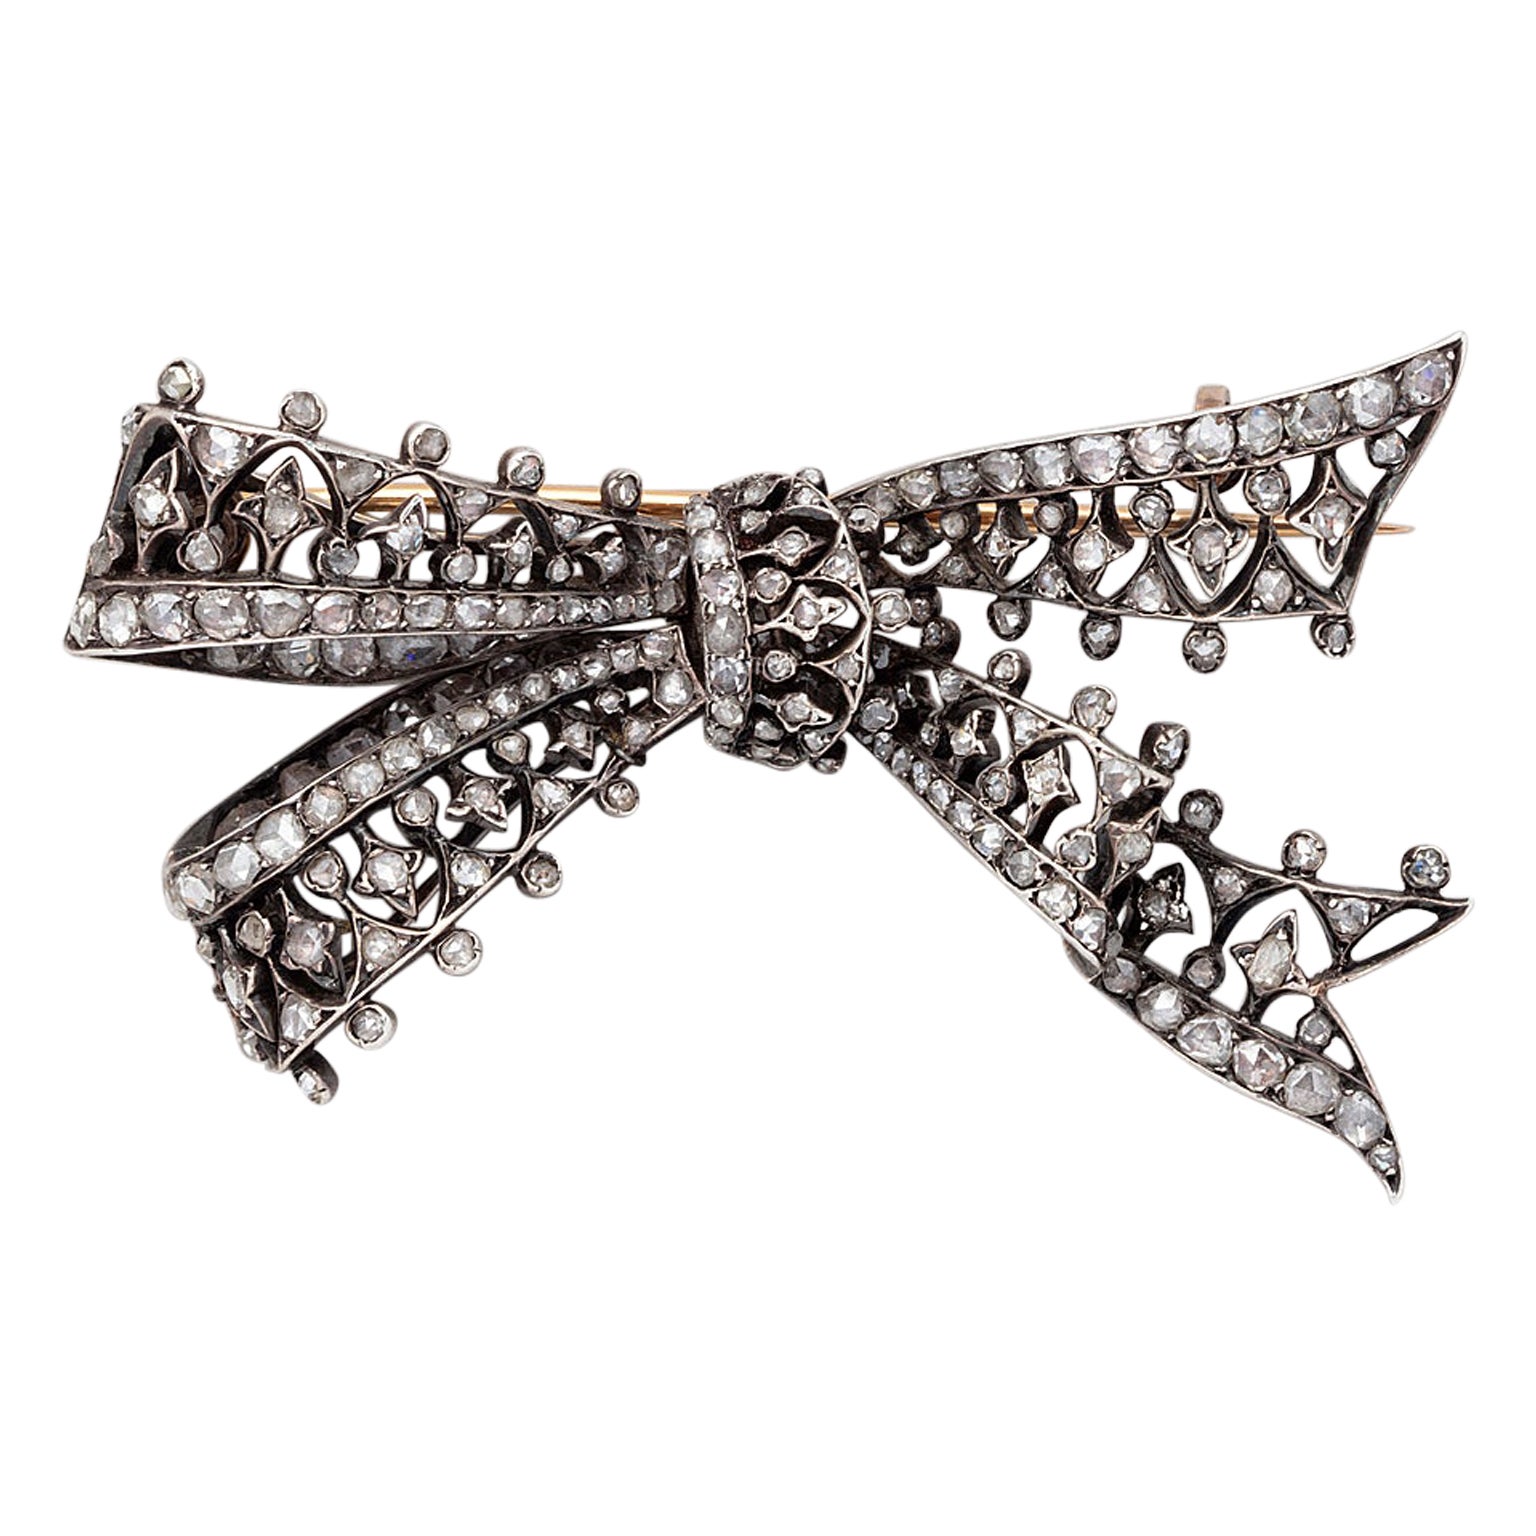 A Silver and Gold Antique Bow Brooch set with Diamonds